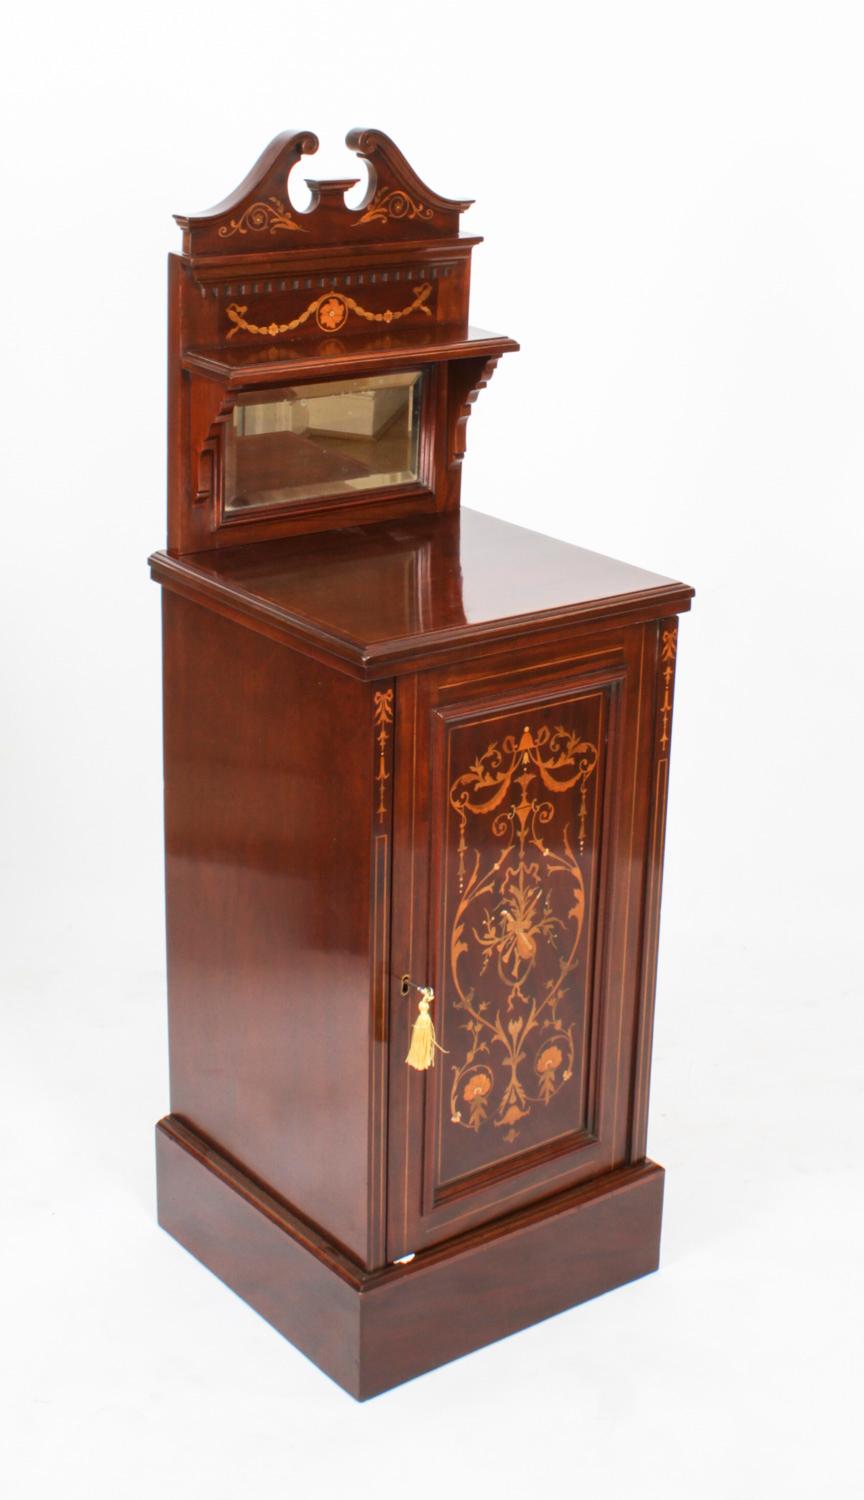 A Pair of Edwardian mahogany and Marquetry Inlaid Sheraton-Revival Bedside Cabinets, the swan-neck pediments above a small shelf with bevelled glass plate below, the moulded top above a hinged cupboard door, one enclosing two sliding trays, the